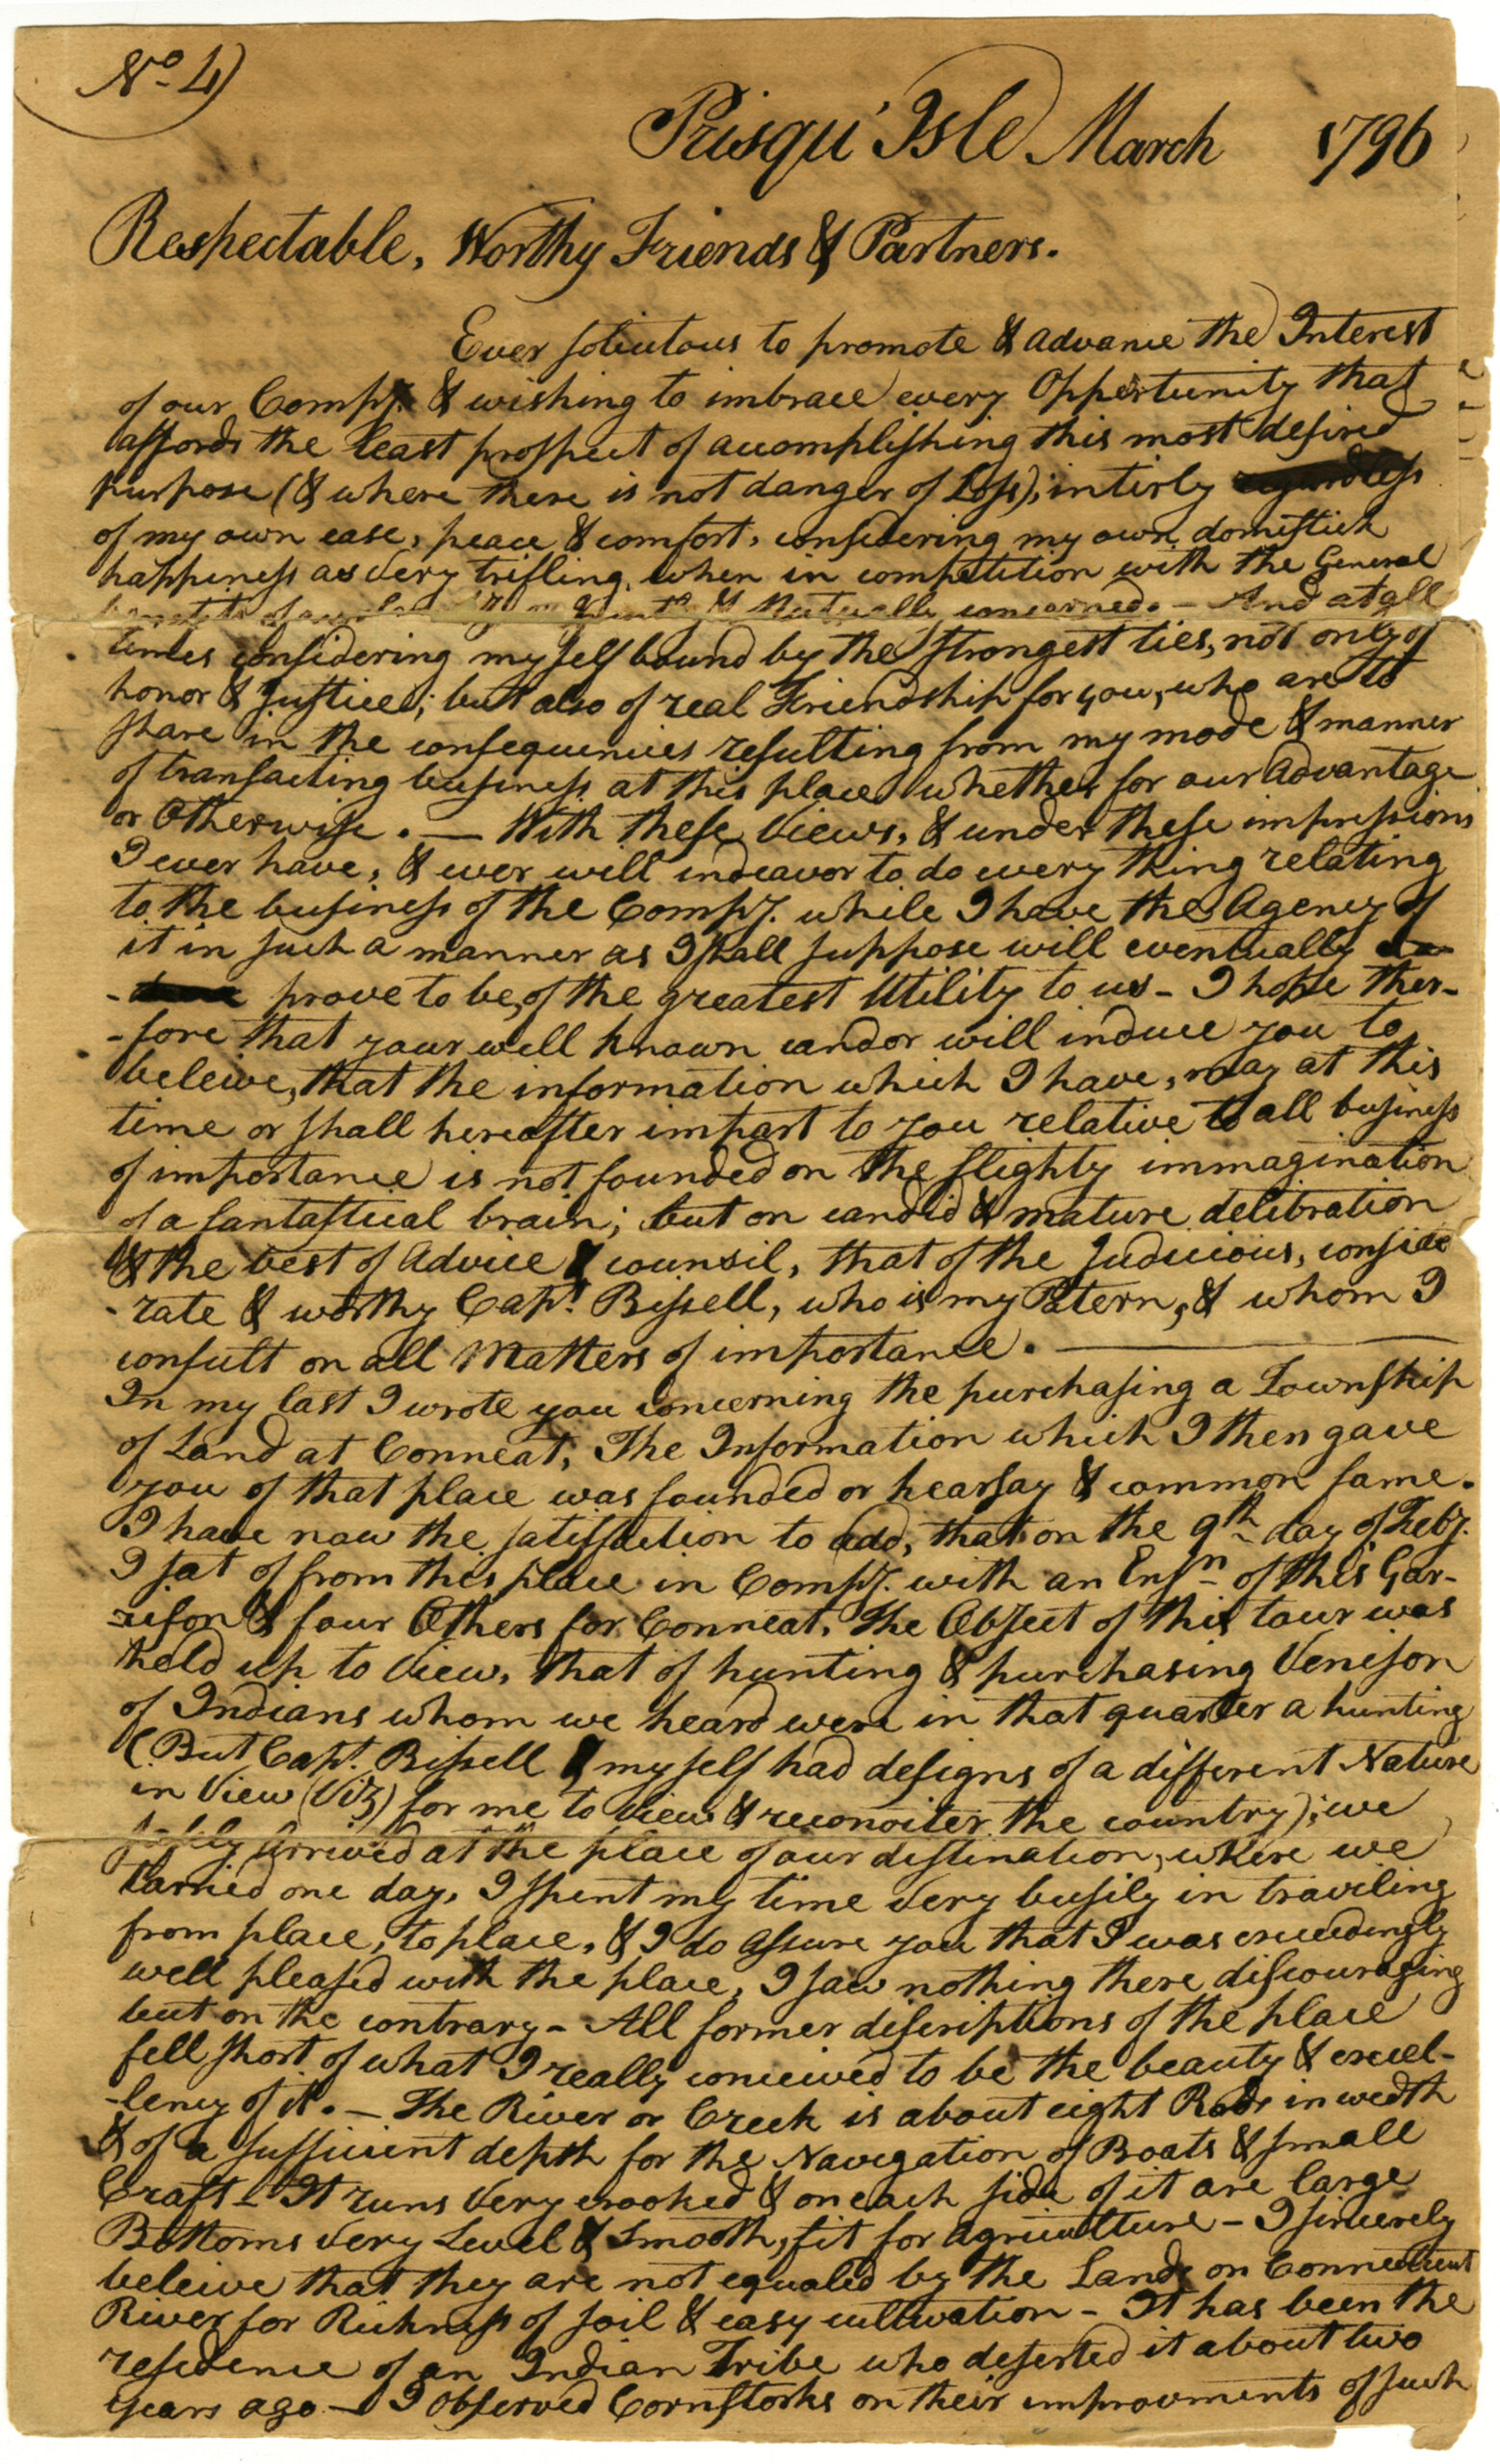 1796/03 Letter from Daniel Ellsworth to John Wyles, Sr. and Aaron Buckland